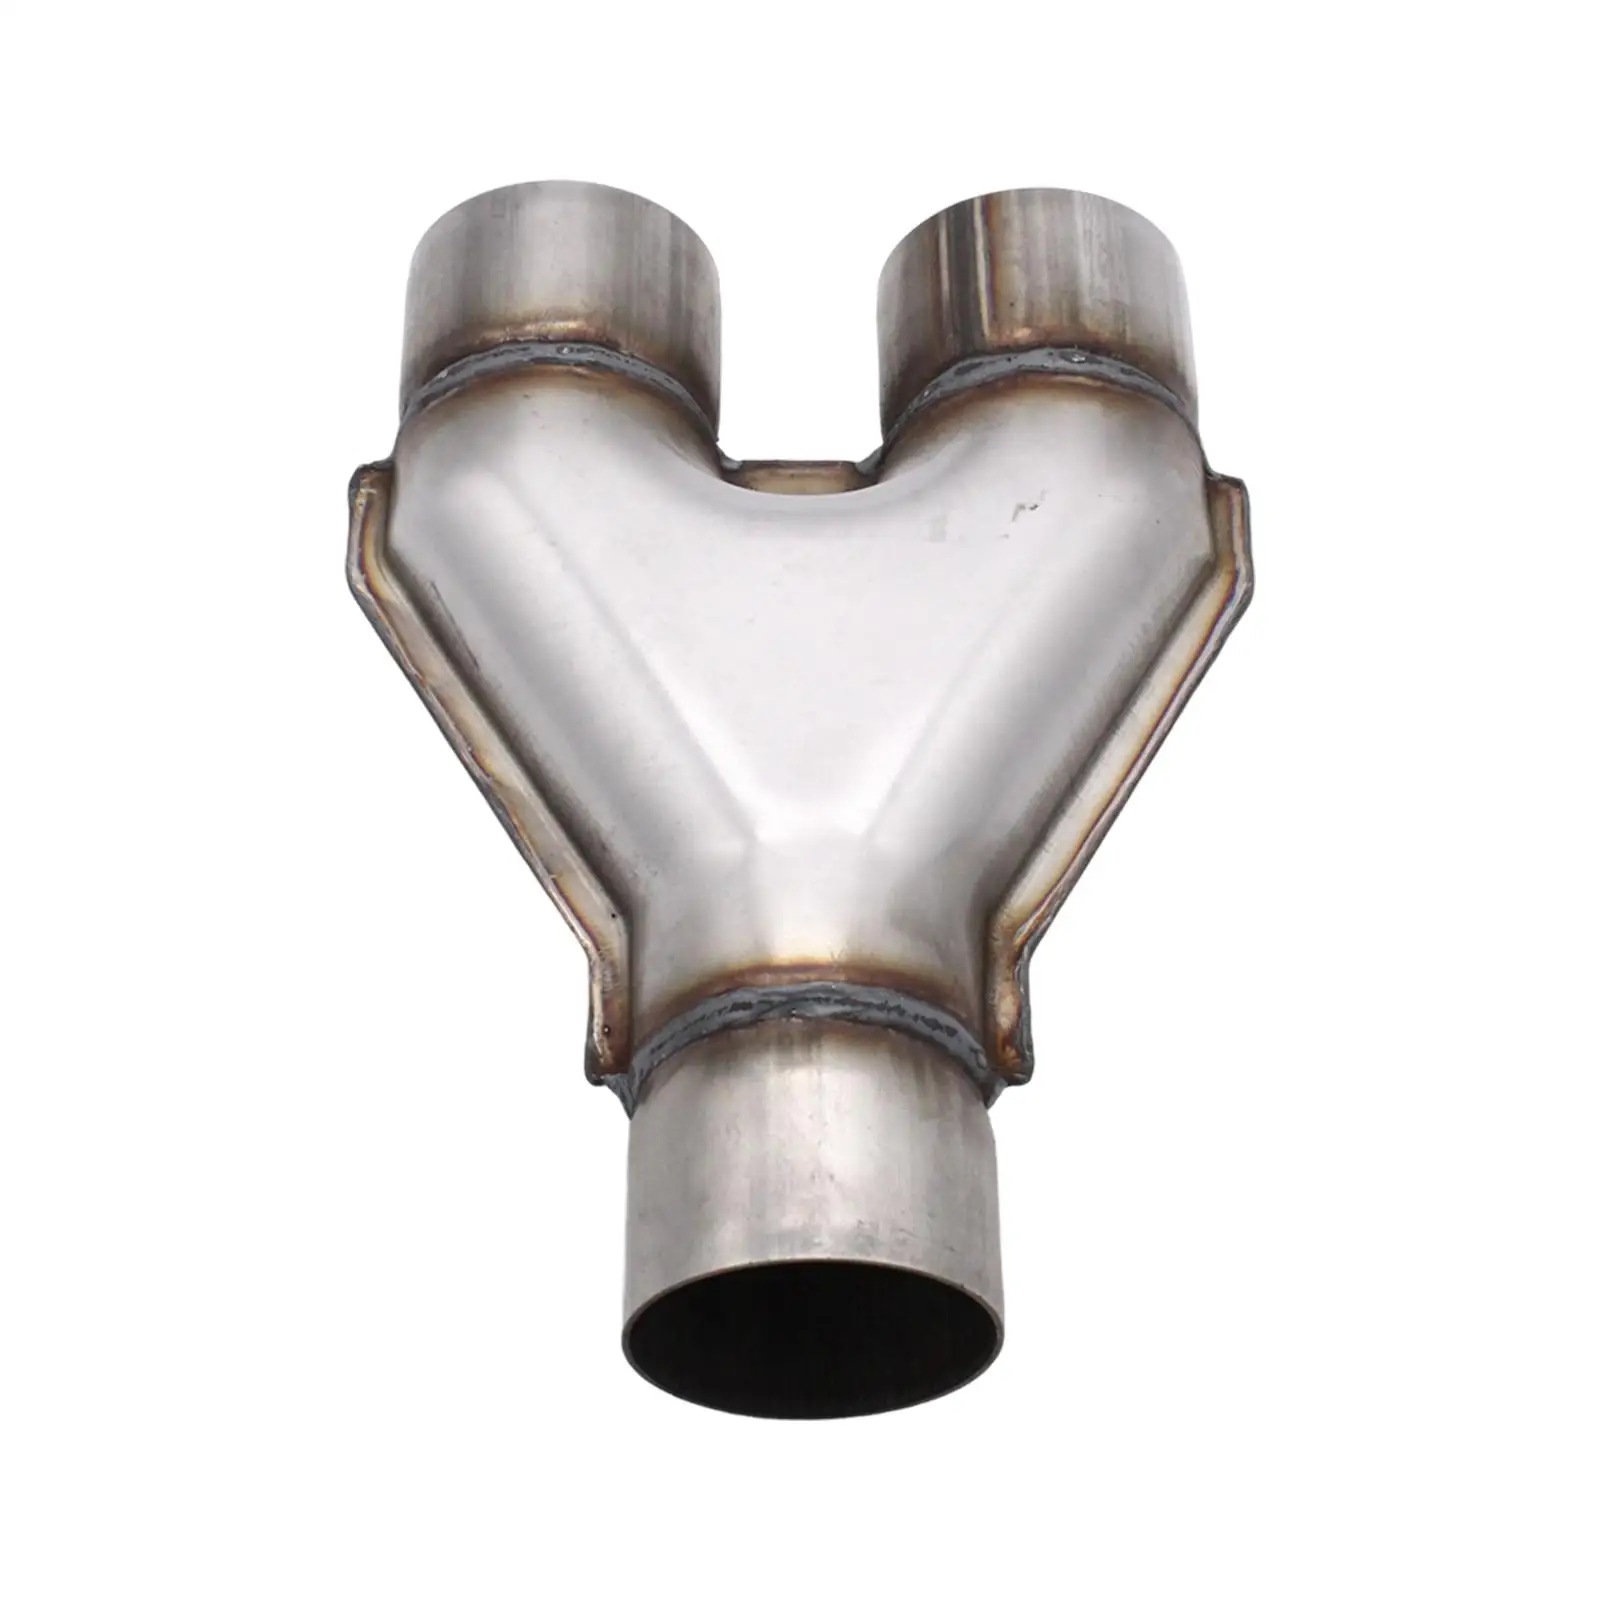 Exhaust Pipe Accessory for Good Performance Easily Install Replacement